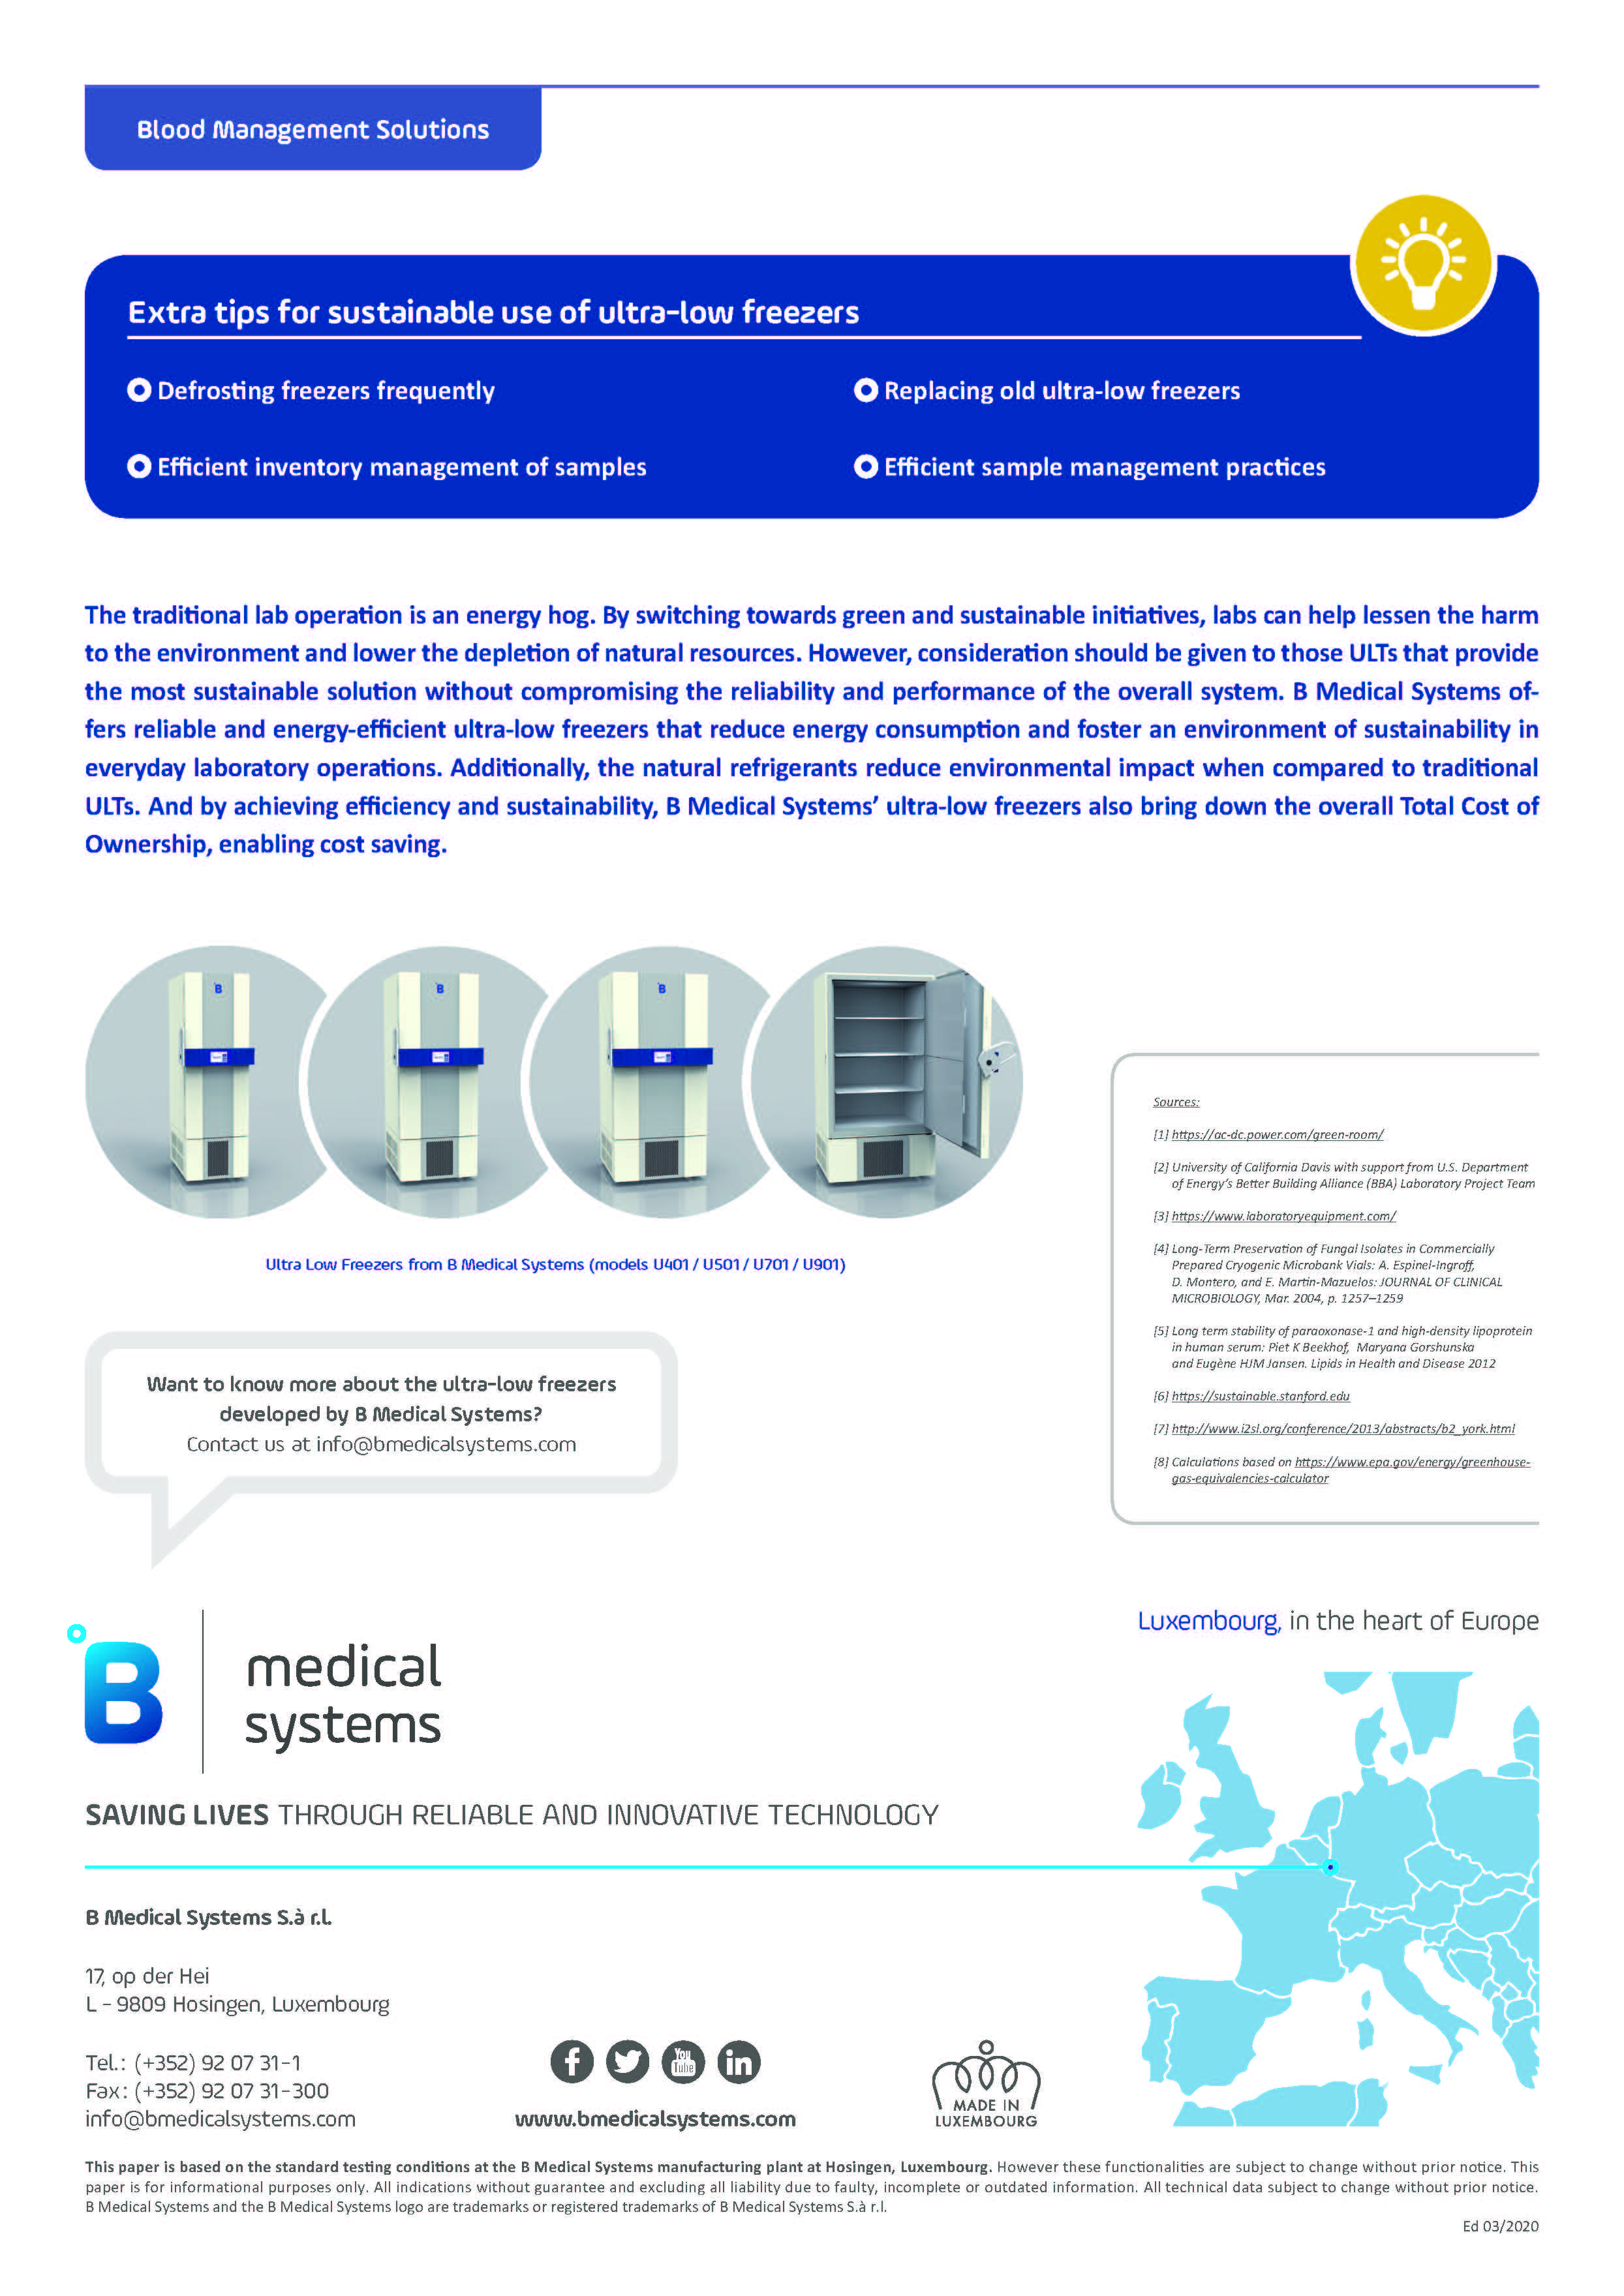 B Medical Systems - Greening up your Laboratories with Ultra Low Freezers - White Paper_Page_4.jpg